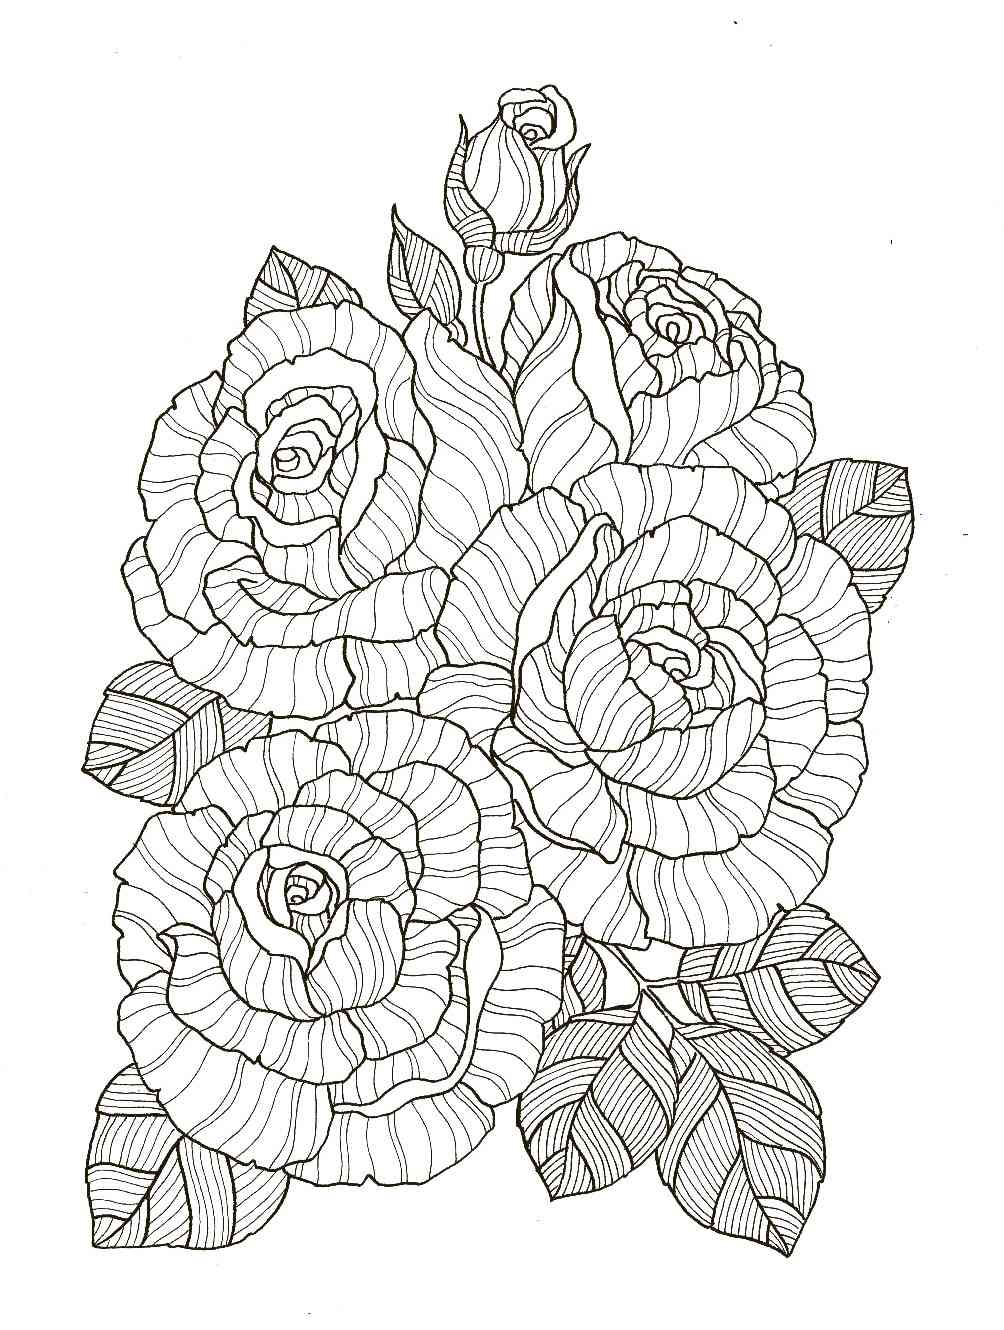 Rose coloring pages for adults